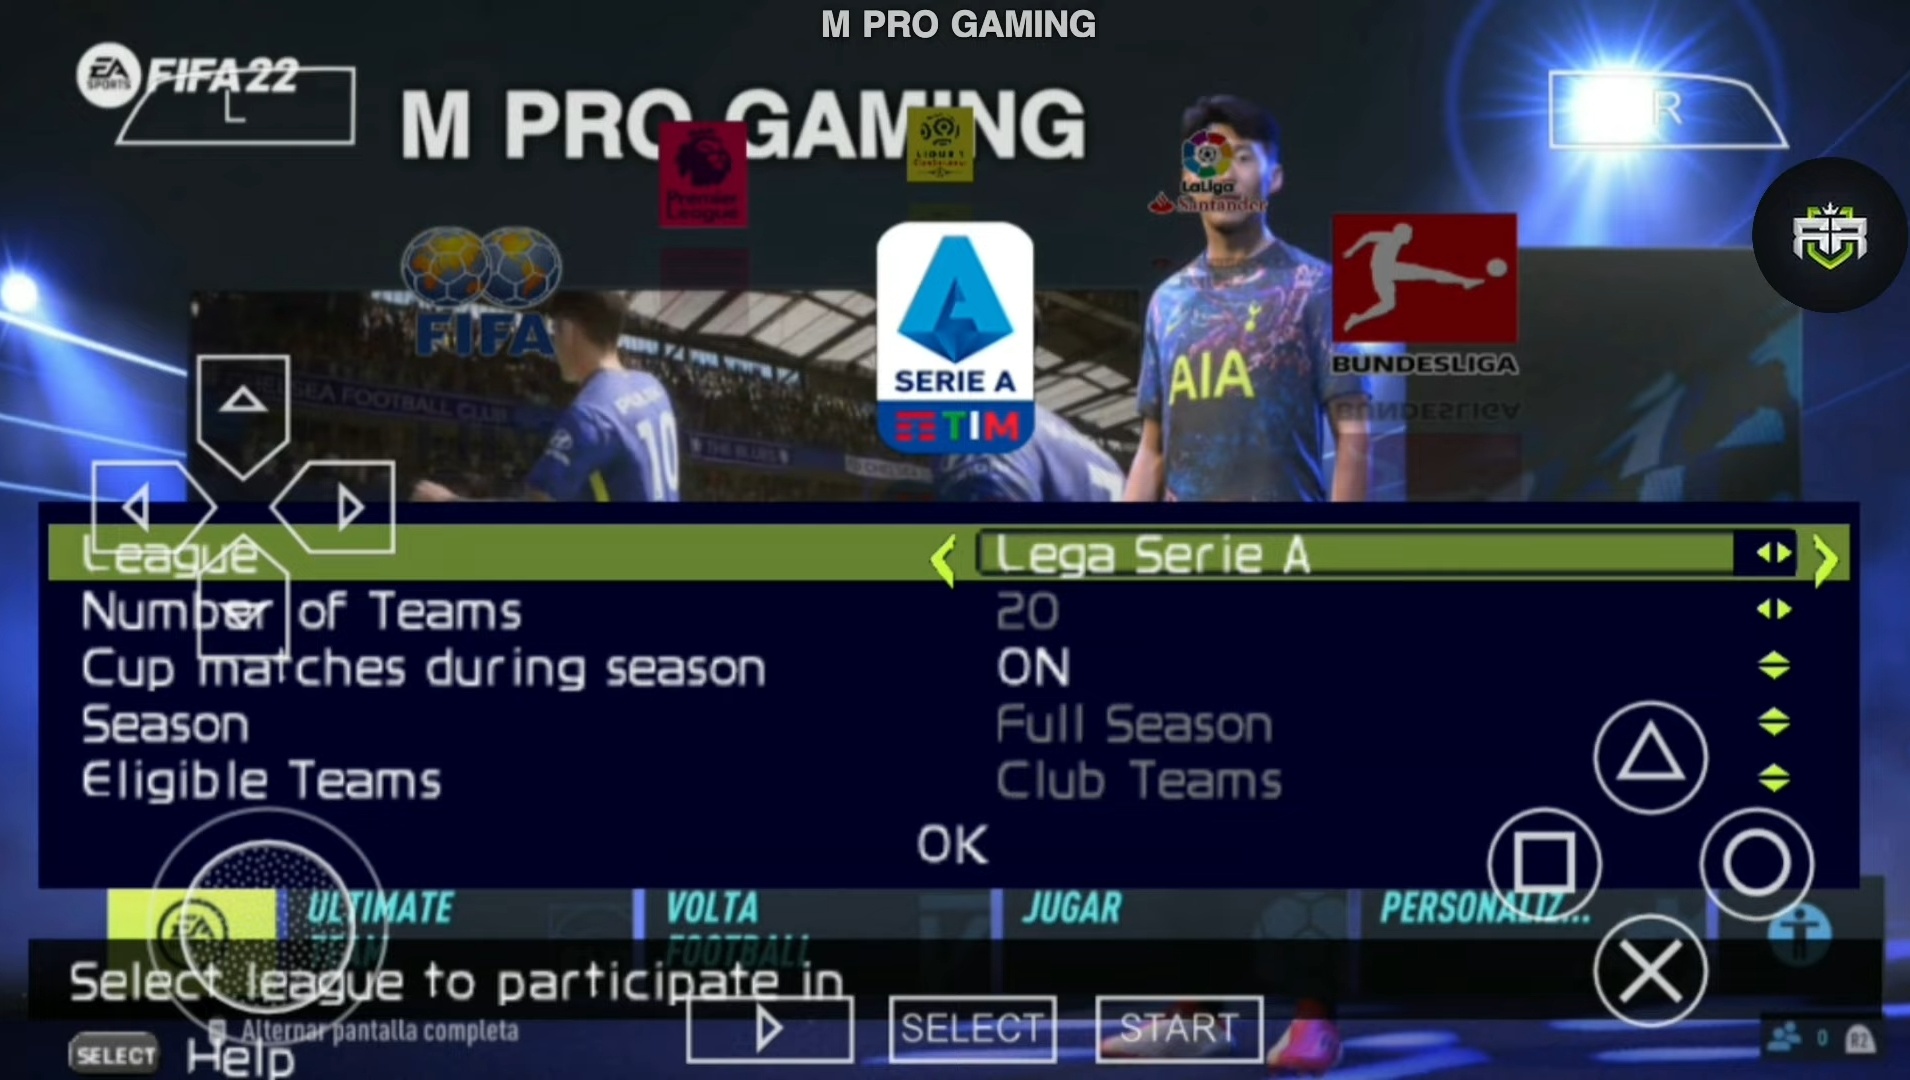 Download FIFA 2018 PPSSPP ISO English (FIFA 18 PPSSPP) for Android